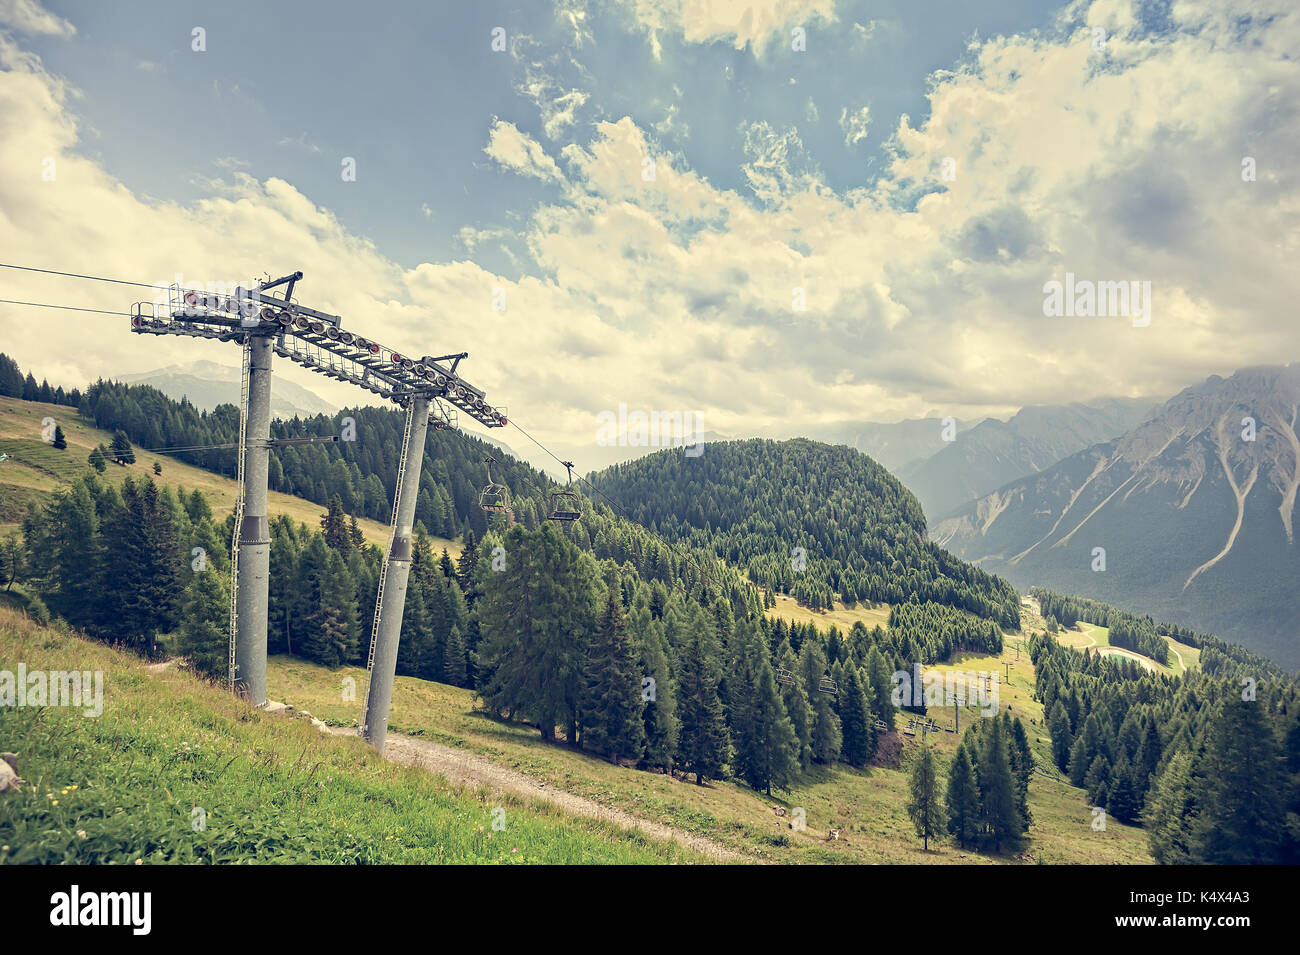 Mountain panorama with forest, Dolomites, valley and chairlift in summer. Sky with clouds. Photos with vintage effect filter. Stock Photo